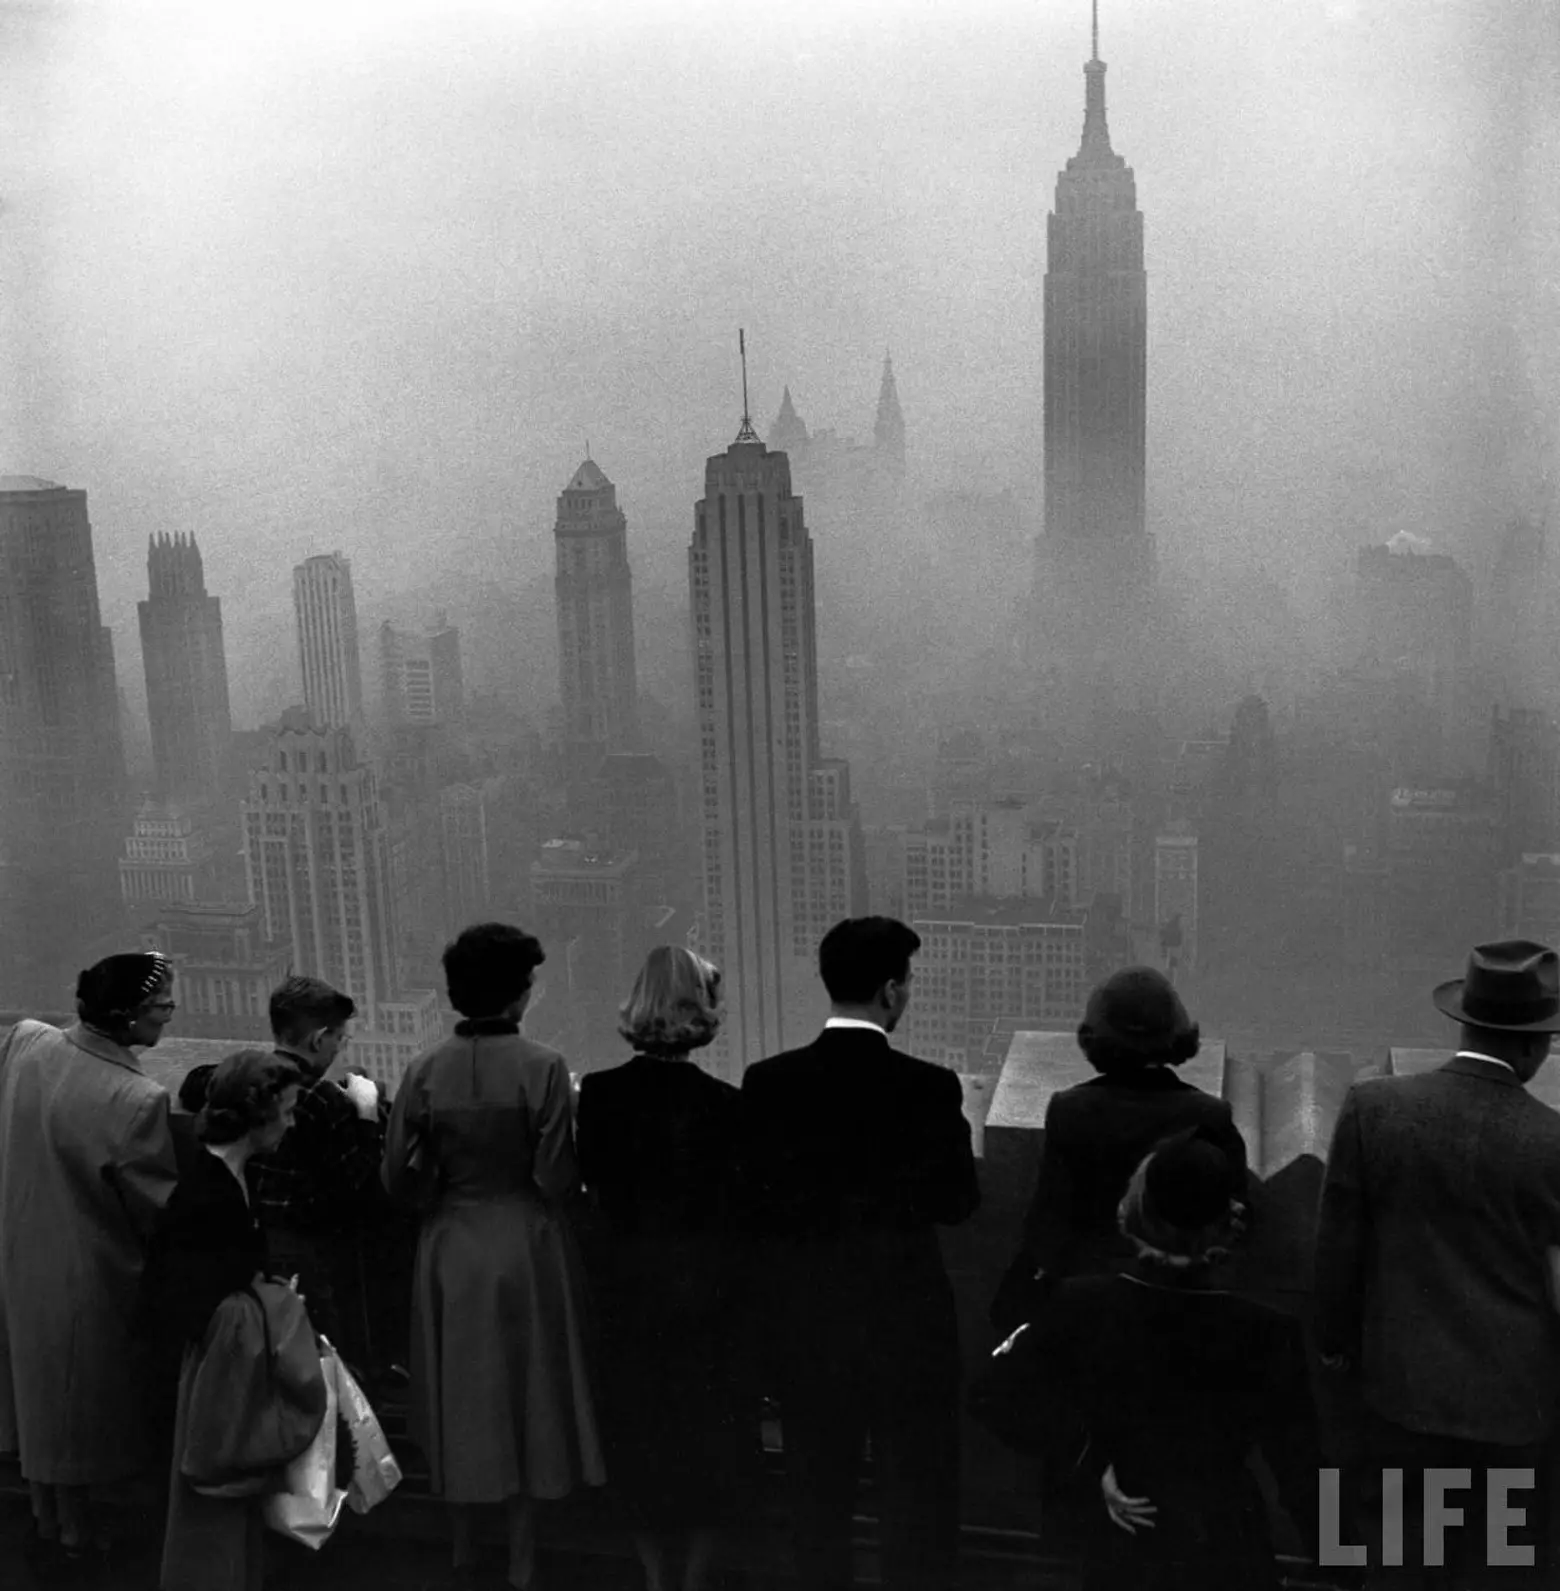 Remembering New York City’s days of deadly smog